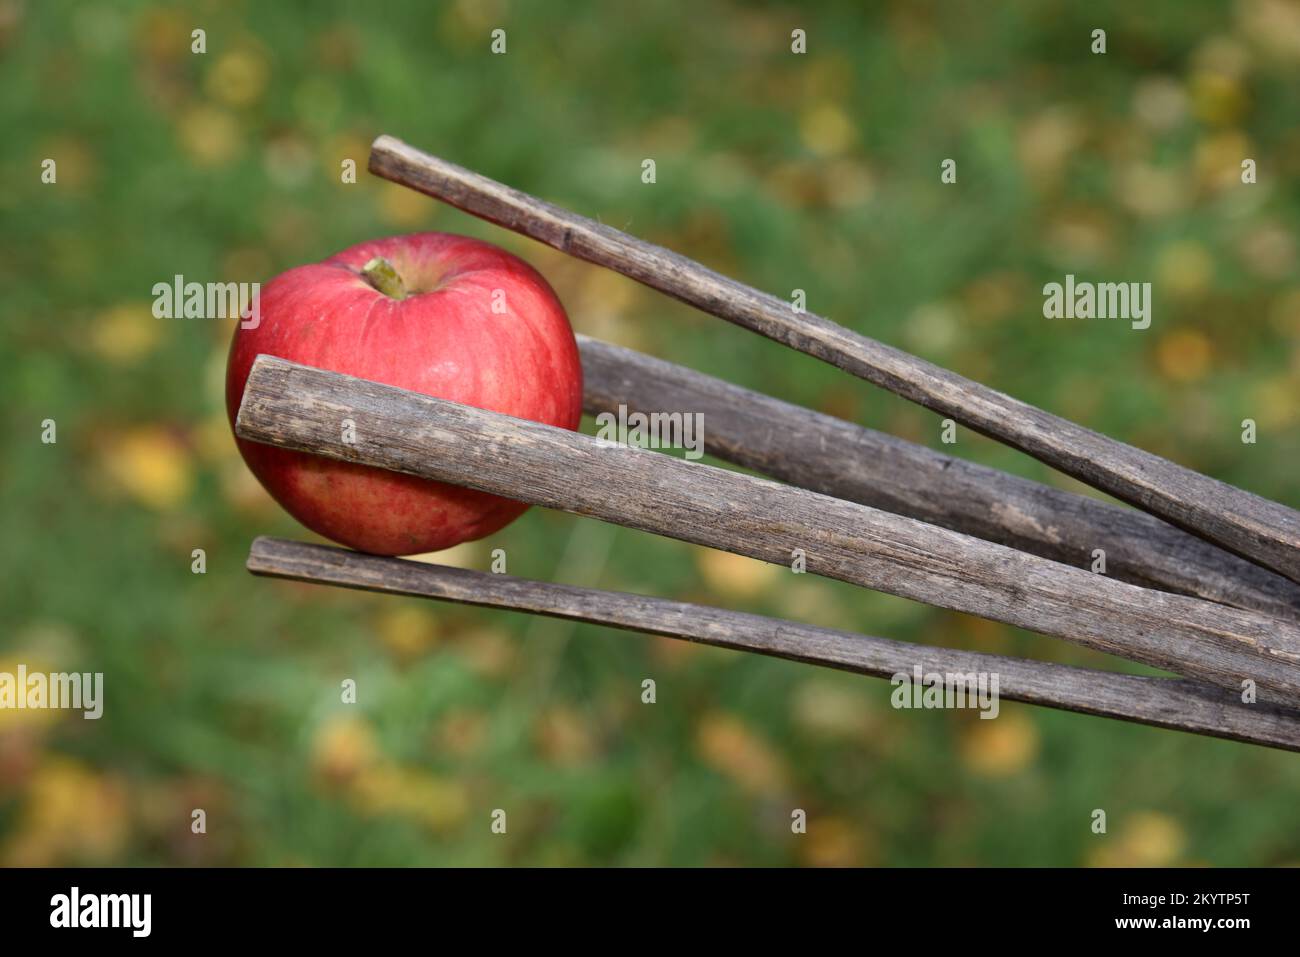 Traditional or Homemade Apple Picker made from Branch of Common Hazel Tree, Corylus avellana Stock Photo